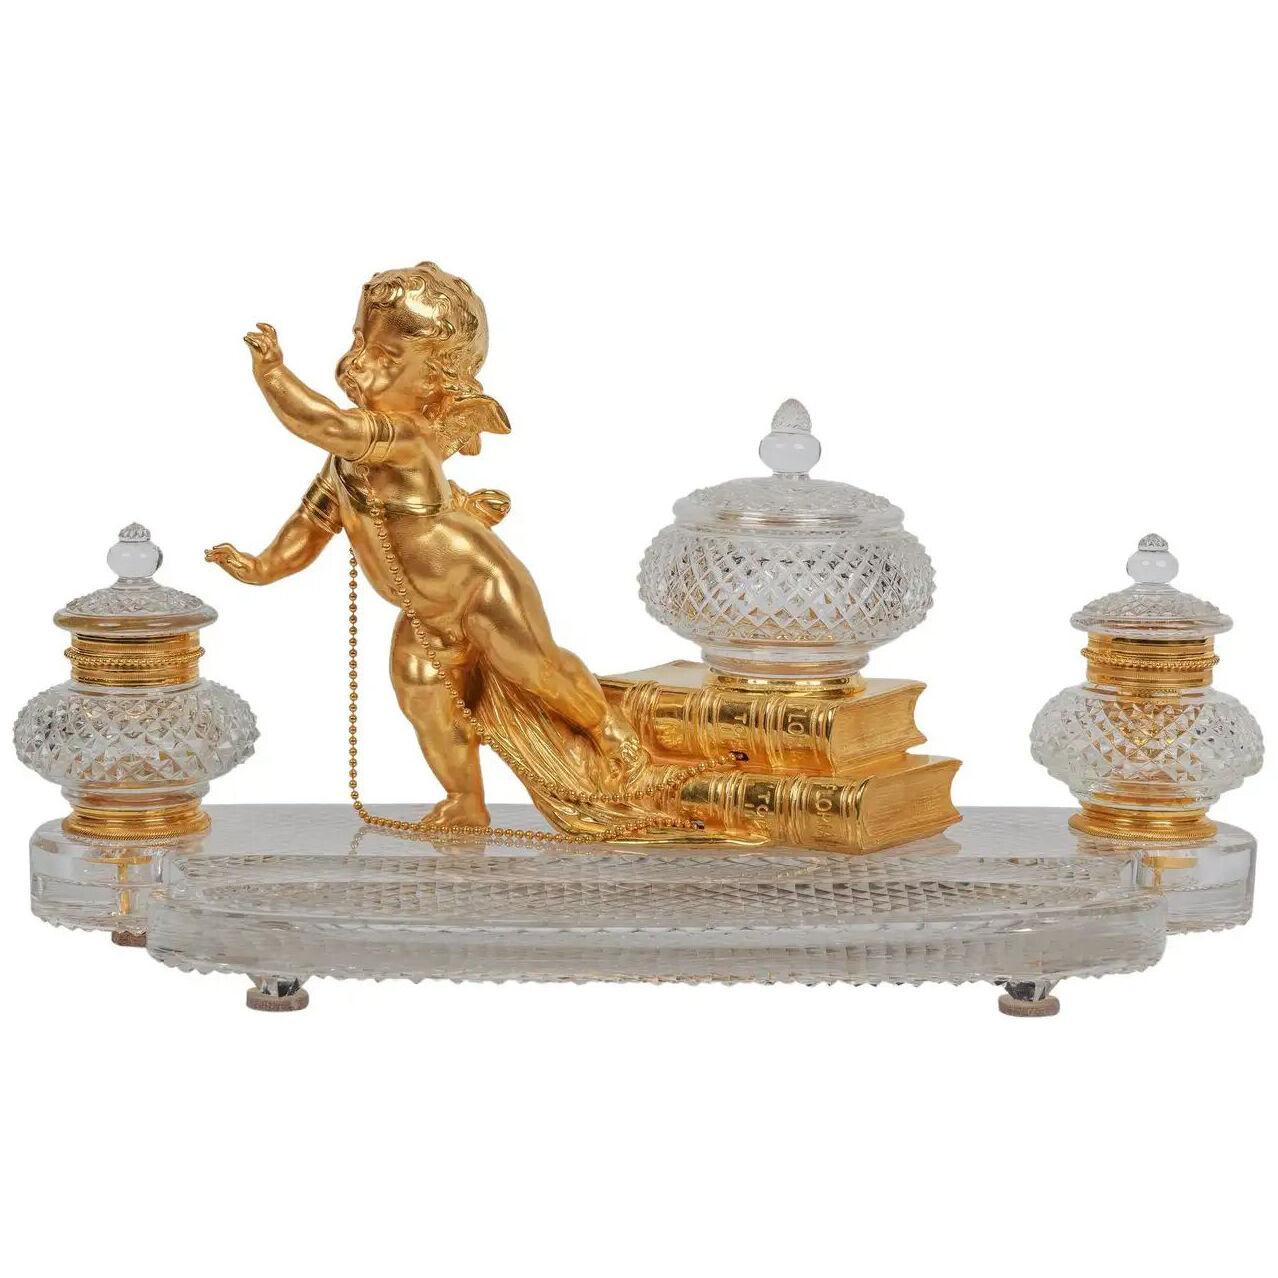 Rare French Ormolu and Diamond-Cut Crystal Figural Inkwell Encrier by Baccarat